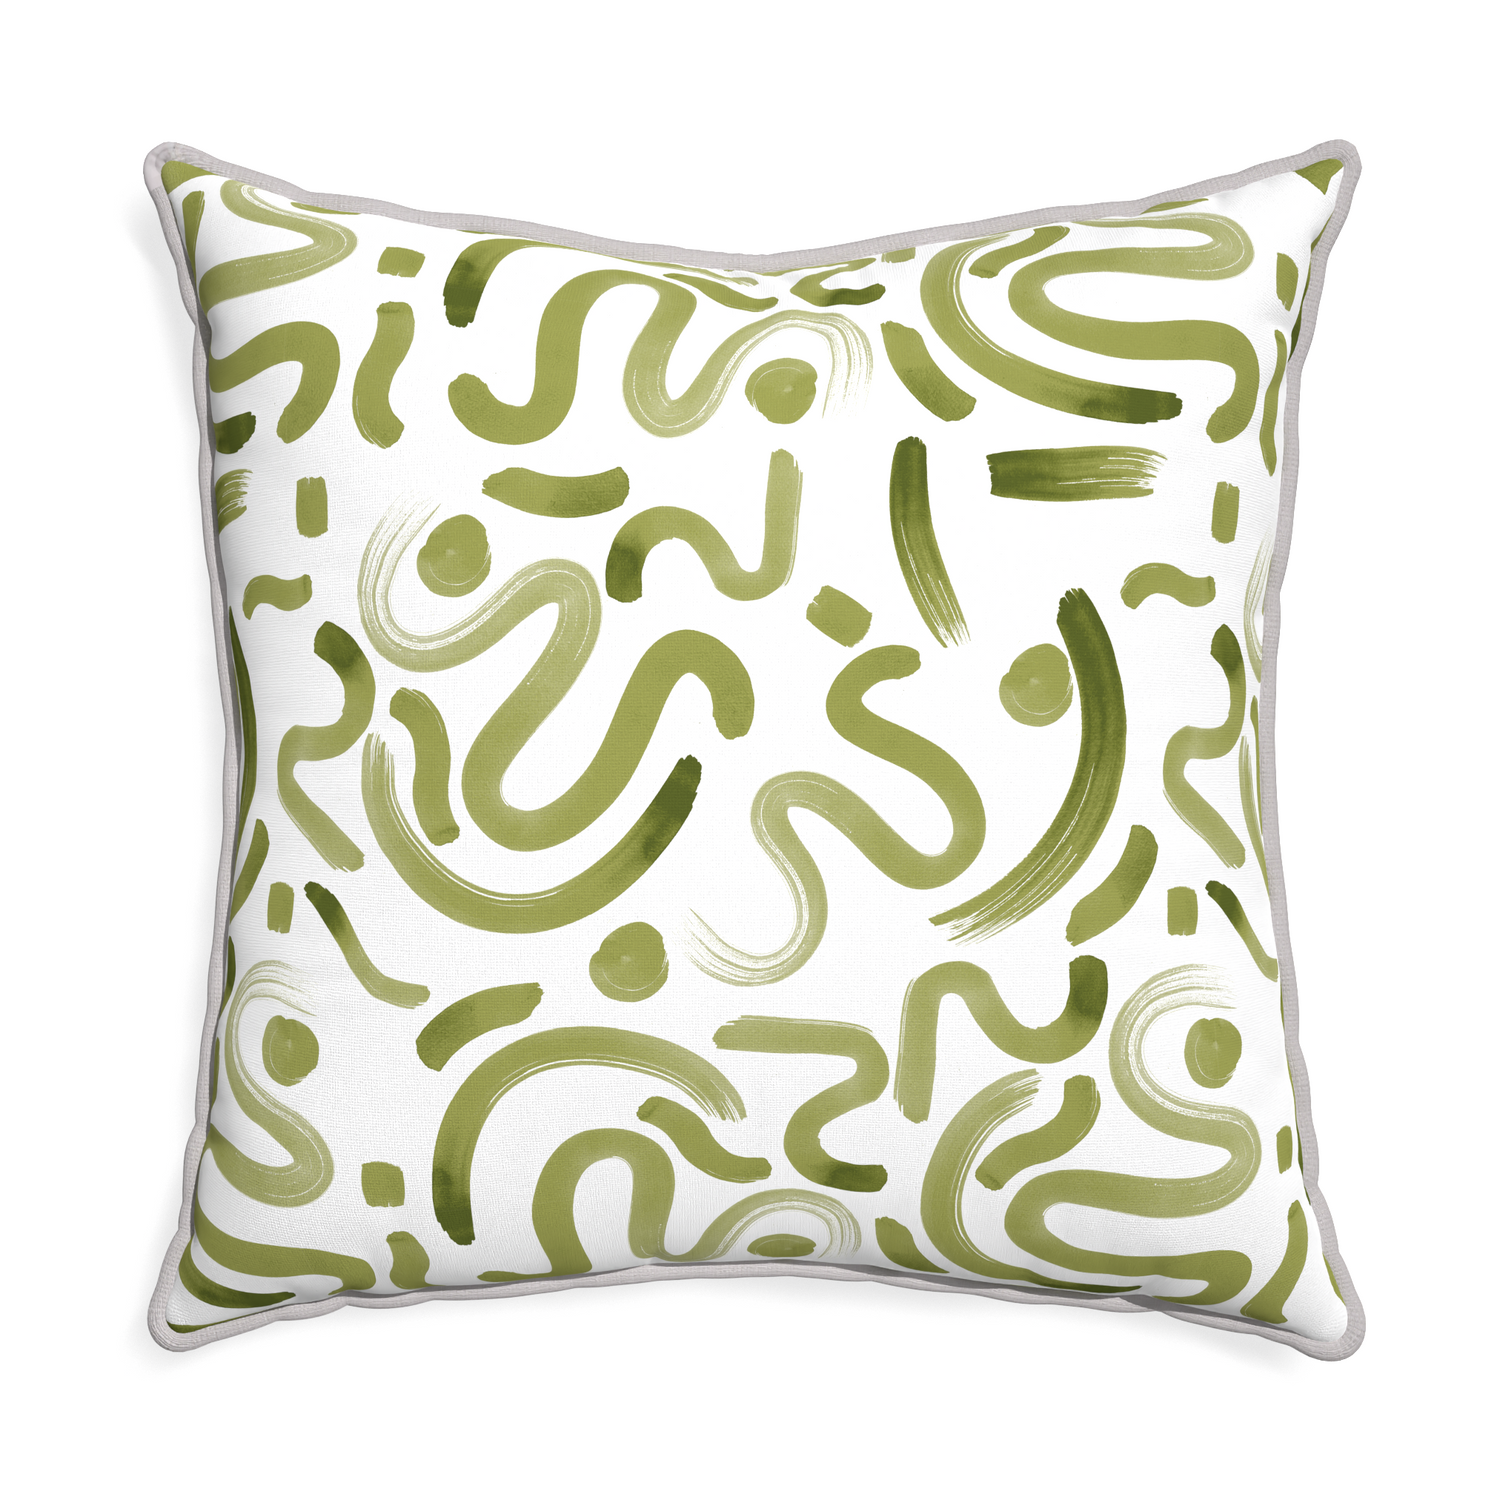 Euro-sham hockney moss custom moss greenpillow with pebble piping on white background